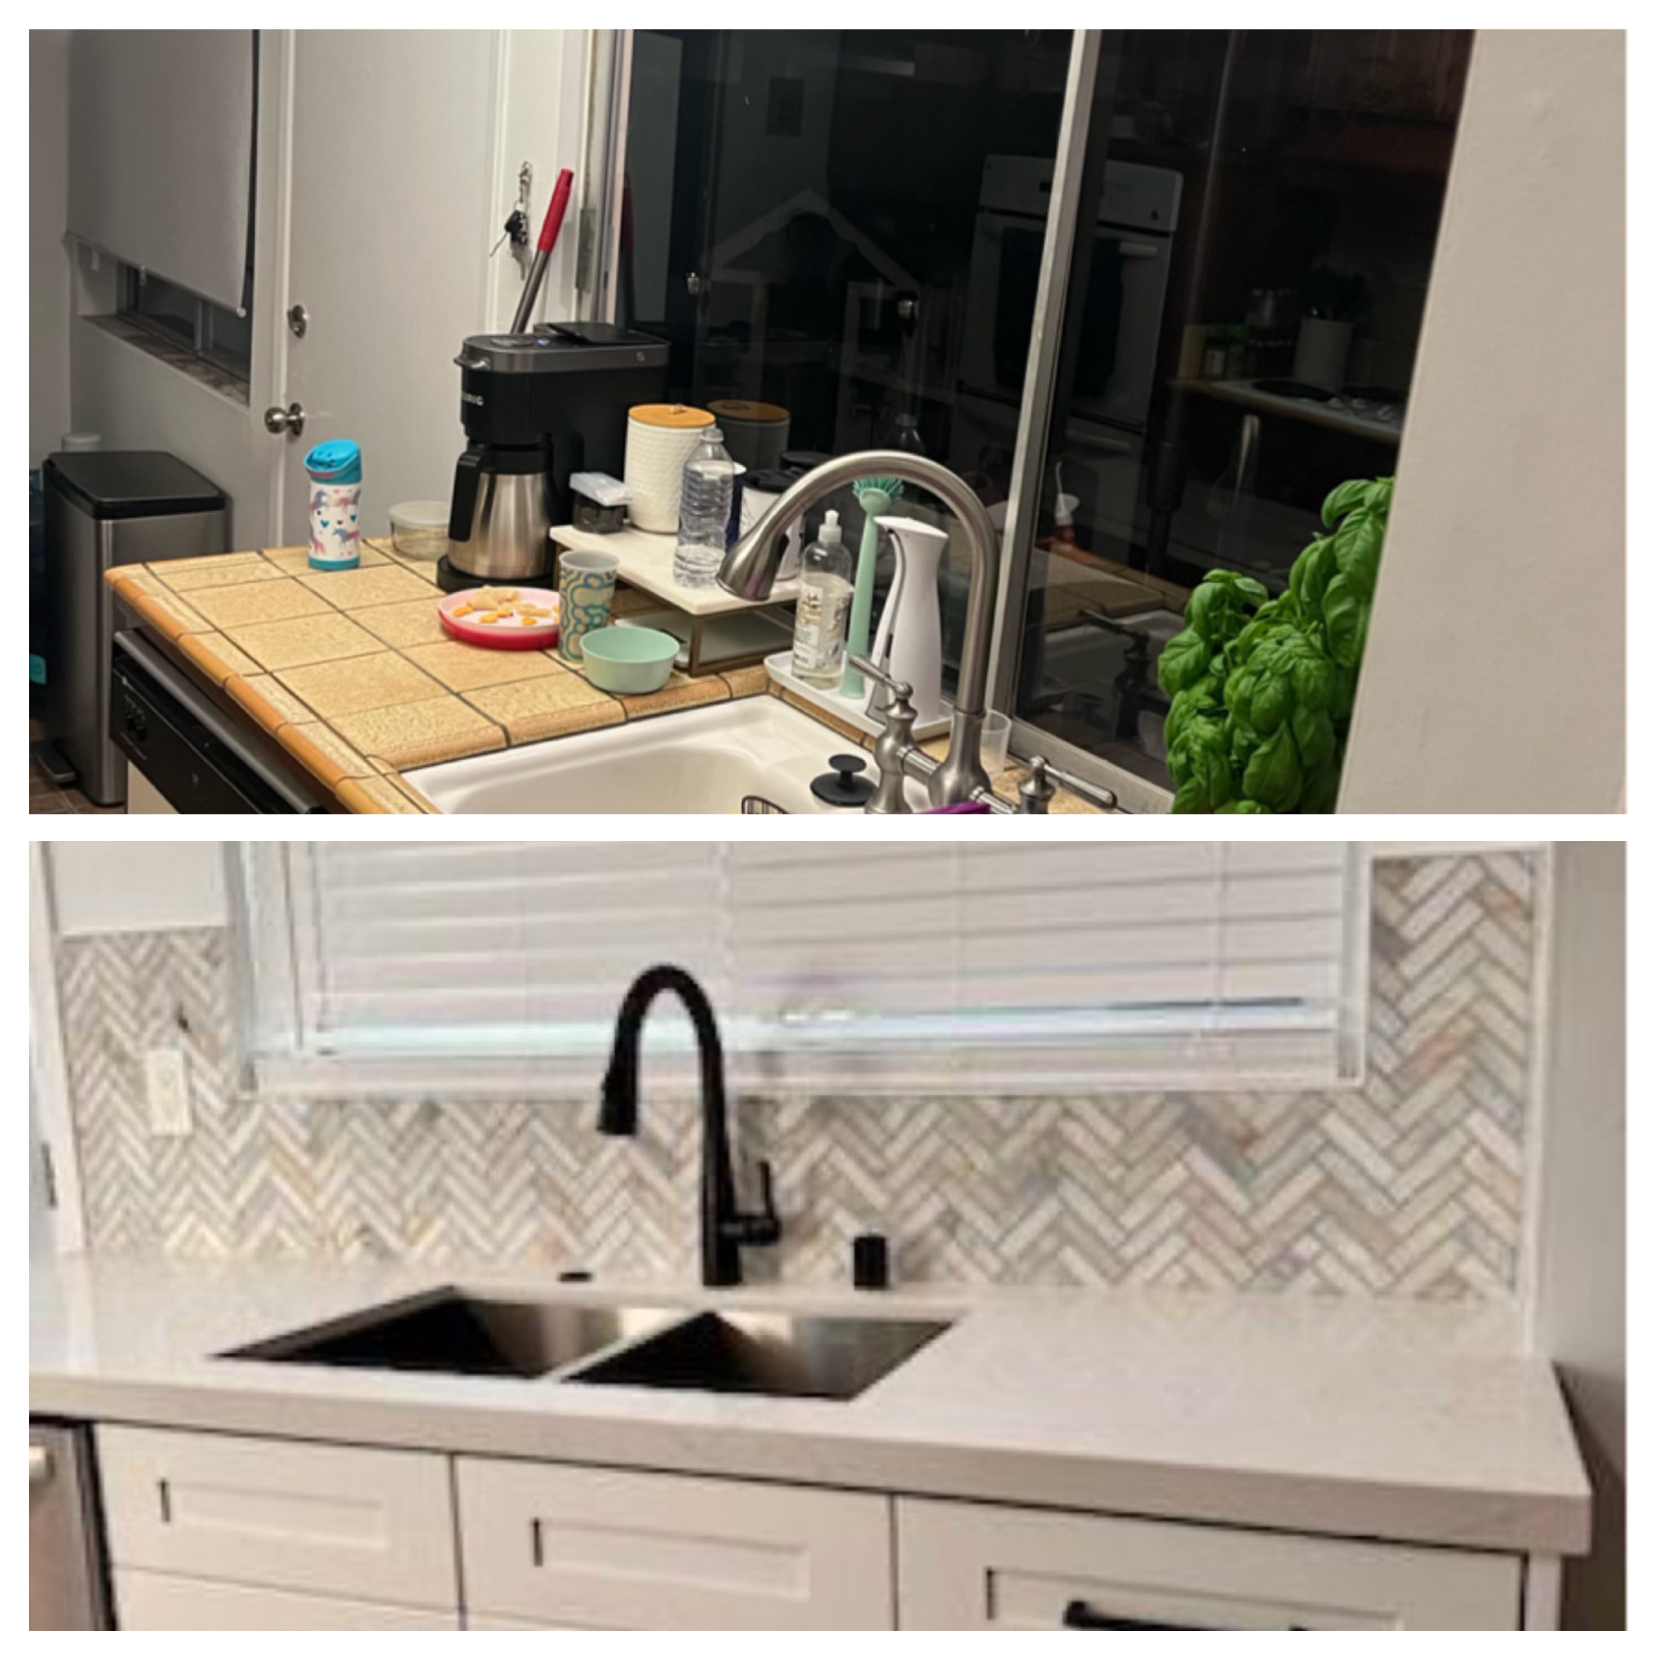 kitchen-remodeling-before-after-46